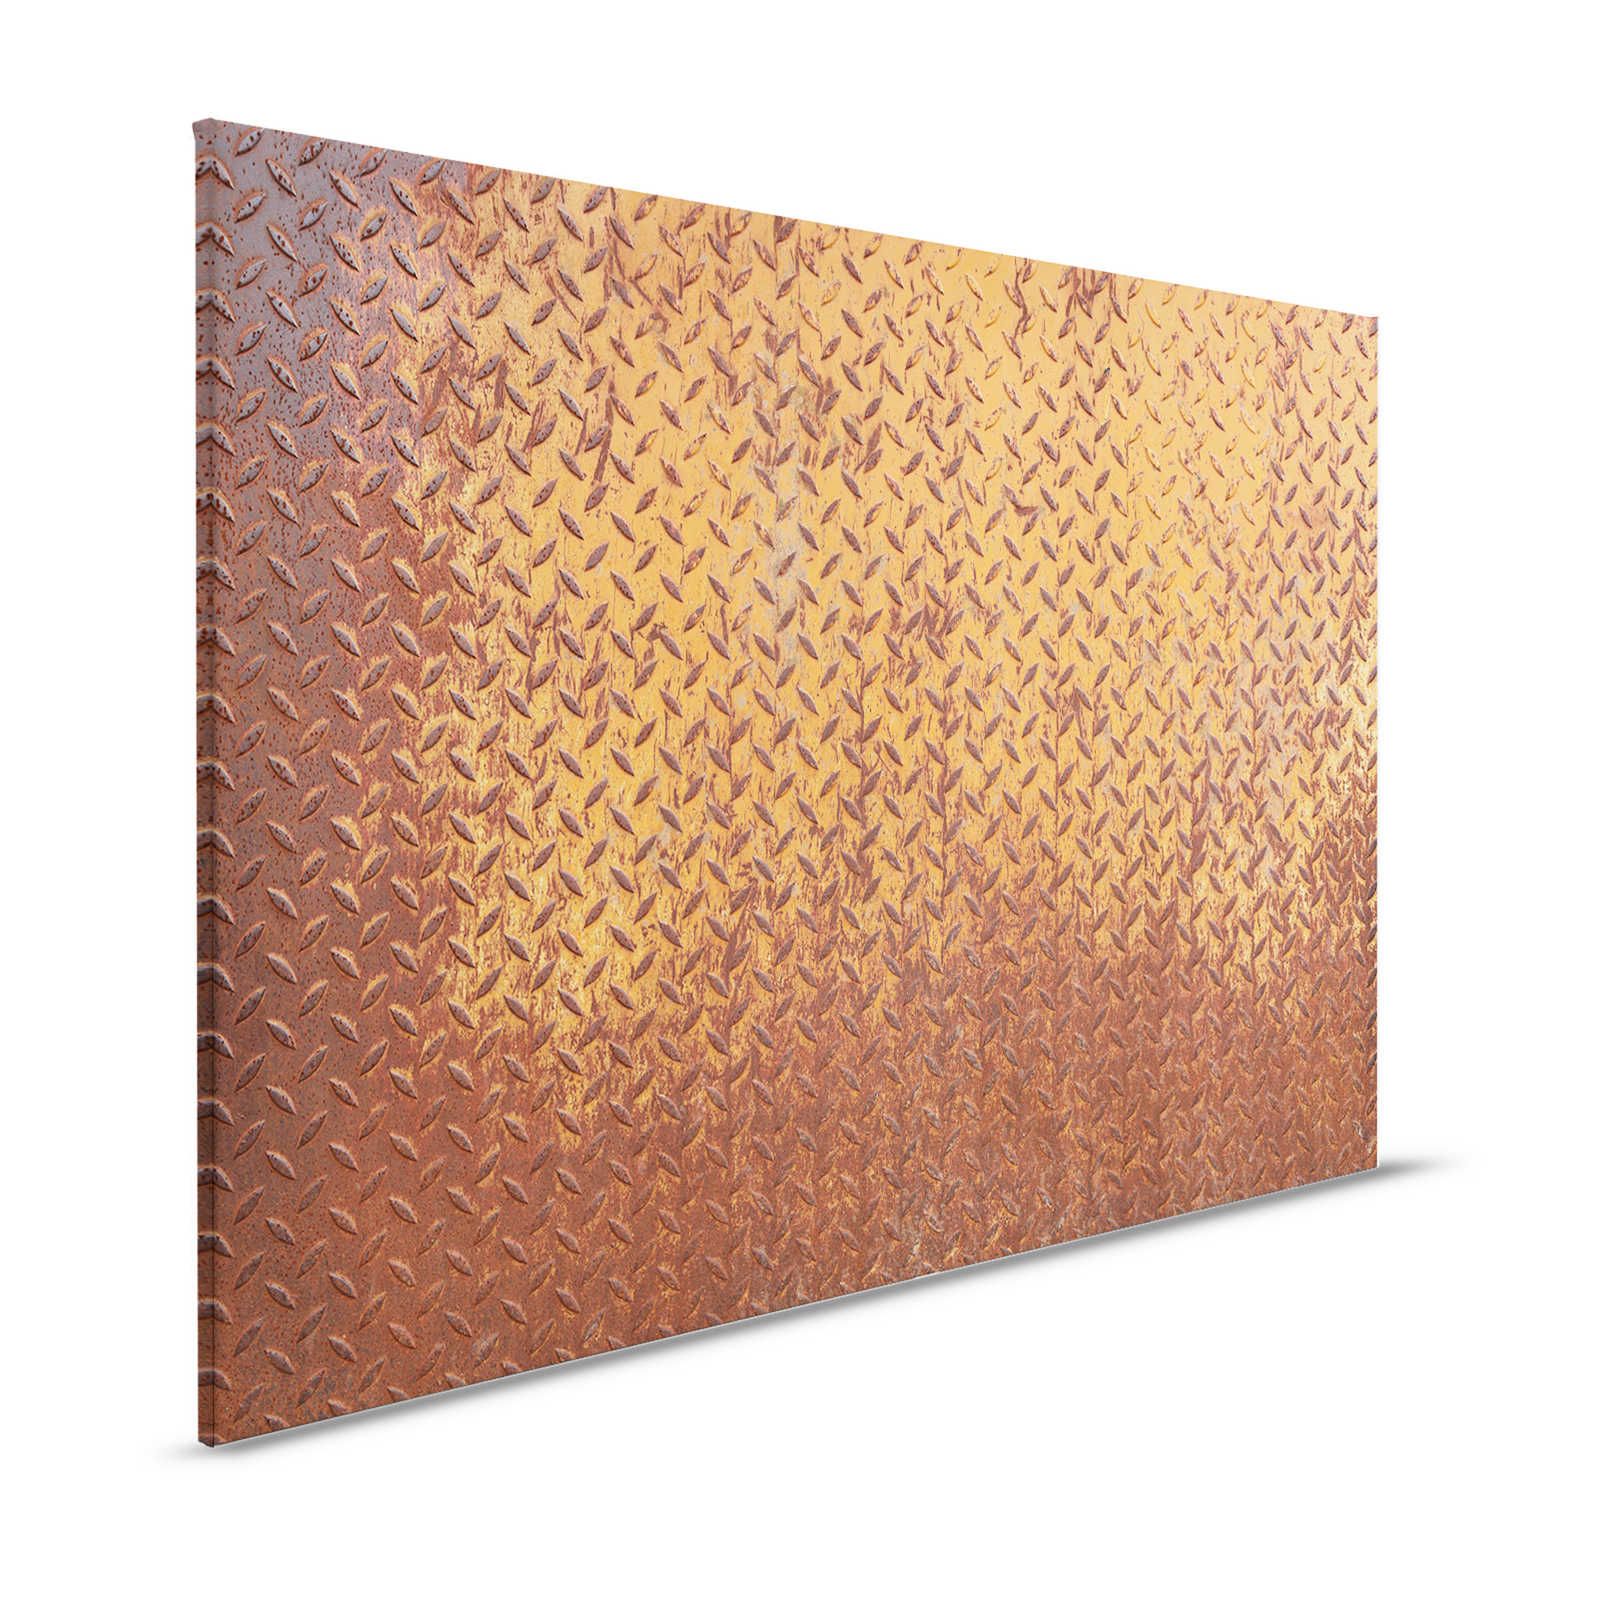 Metal Canvas Painting Steel Plate Rust with Diamond Pattern - 1.20 m x 0.80 m
